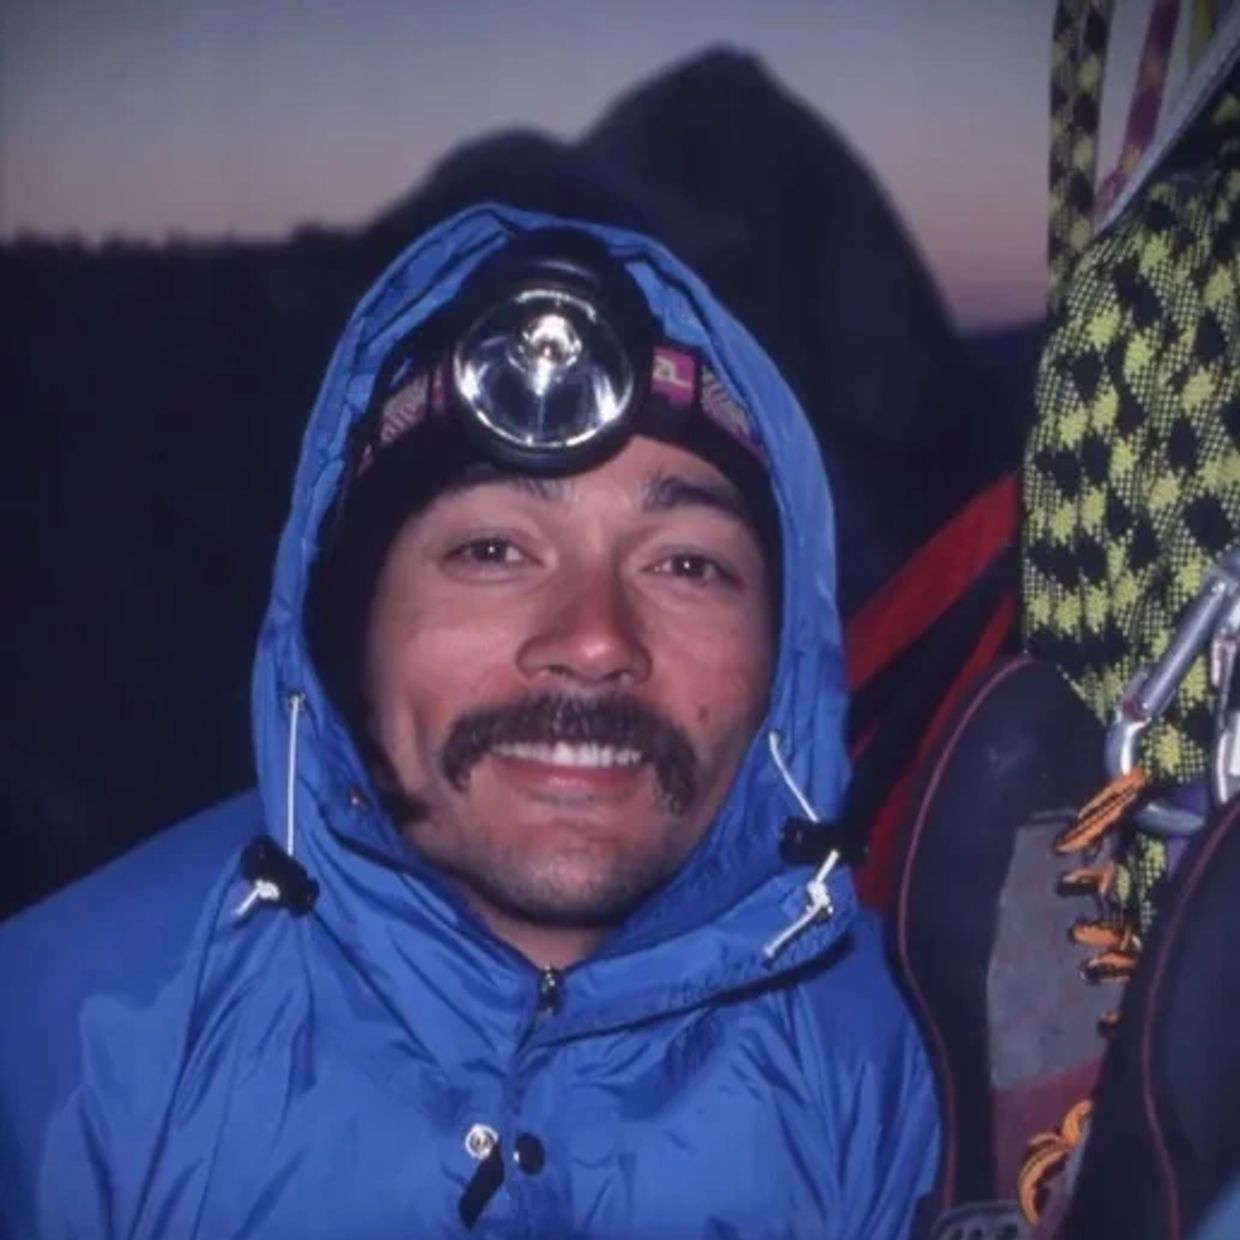 vertical20: Rites of Passage - The Legacy of Adventure Climbing in the  Sierra Nevada